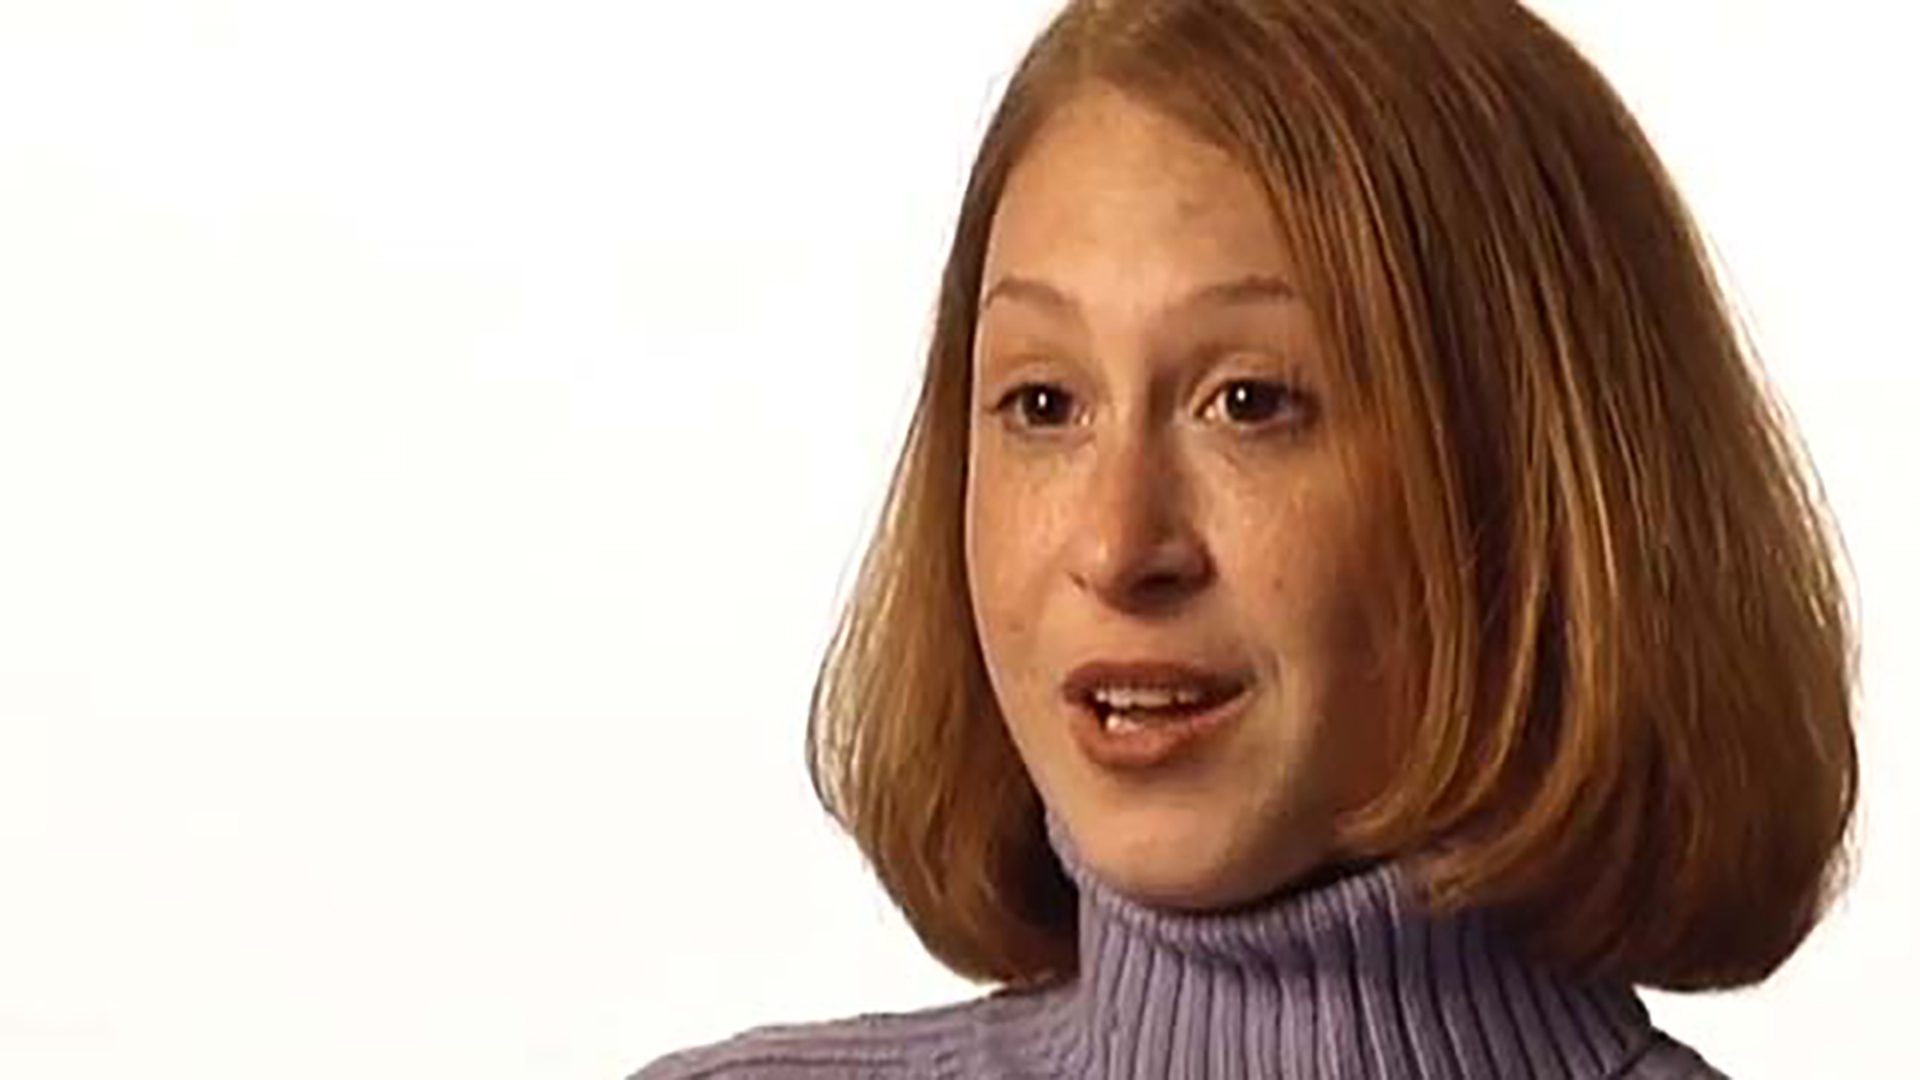 A young adult woman wearing a light purple turtleneck is interviewed against a white background.